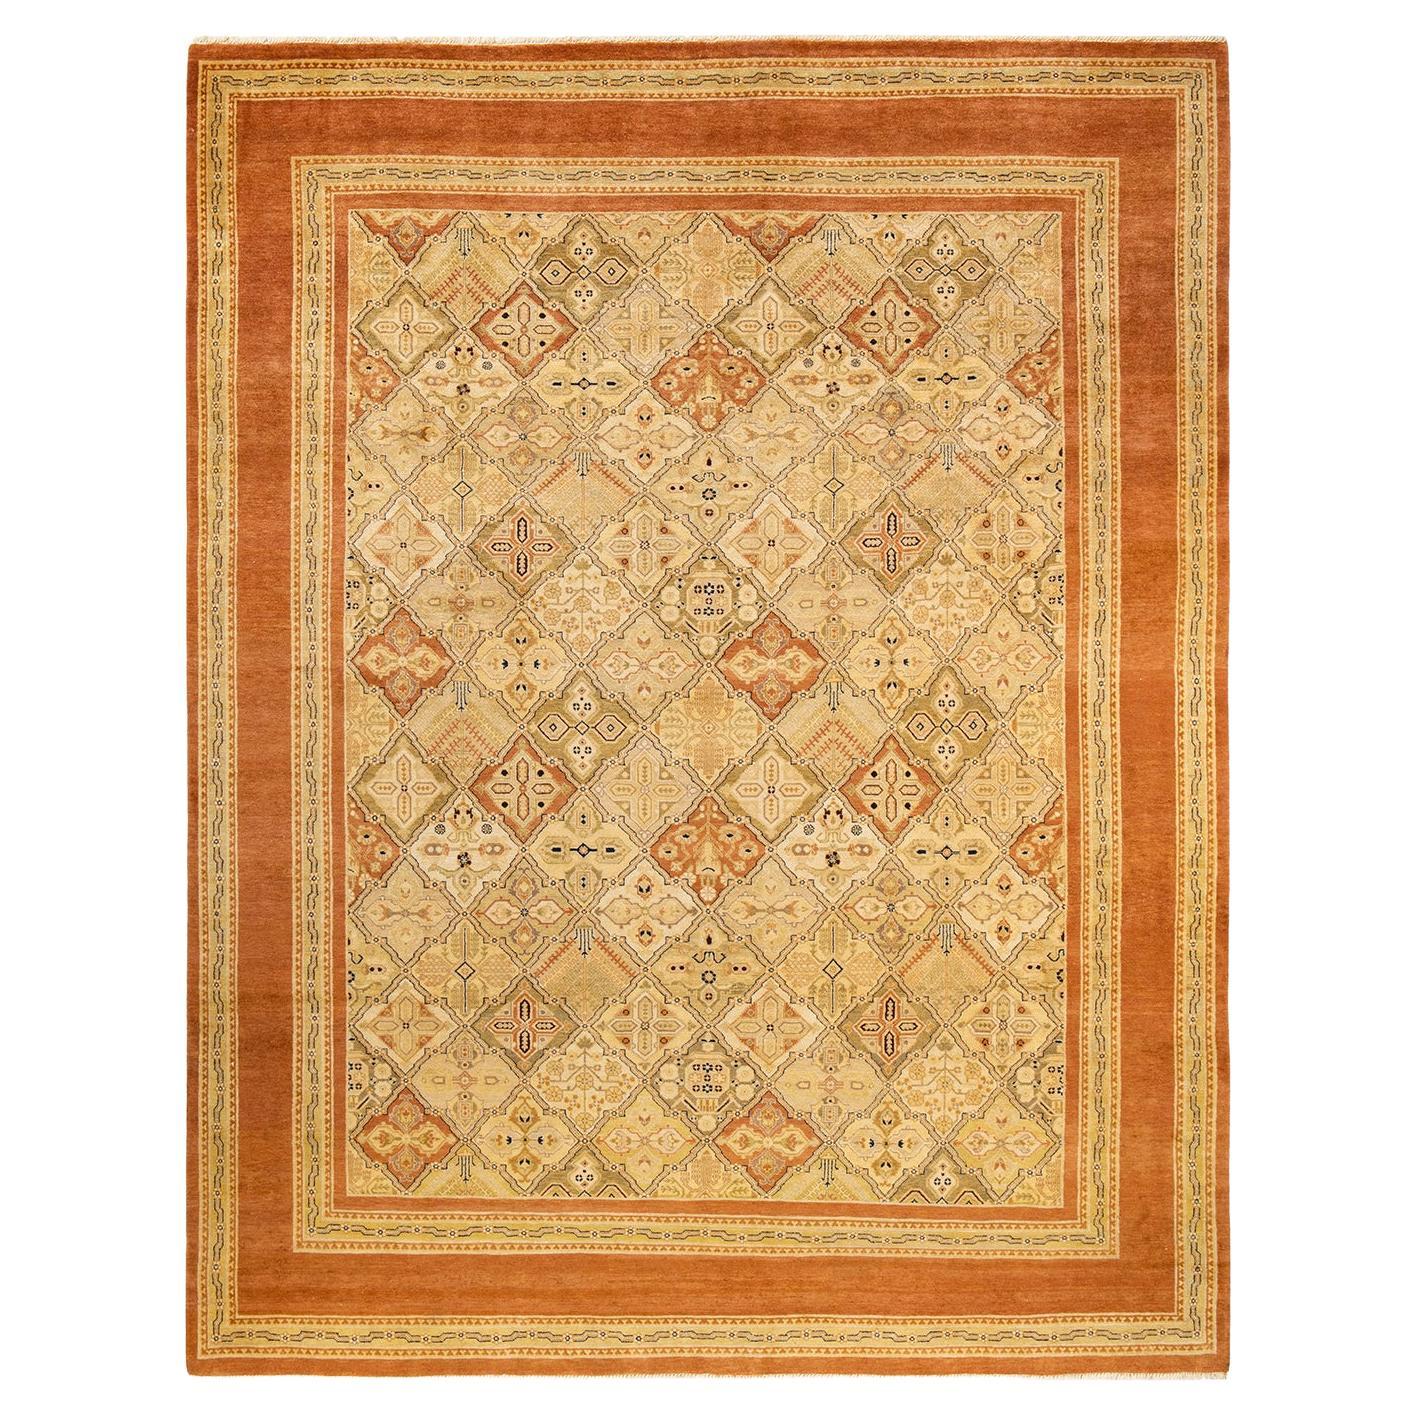 One-Of-A-Kind Hand Made Contemporary Eclectic Brown Area Rug